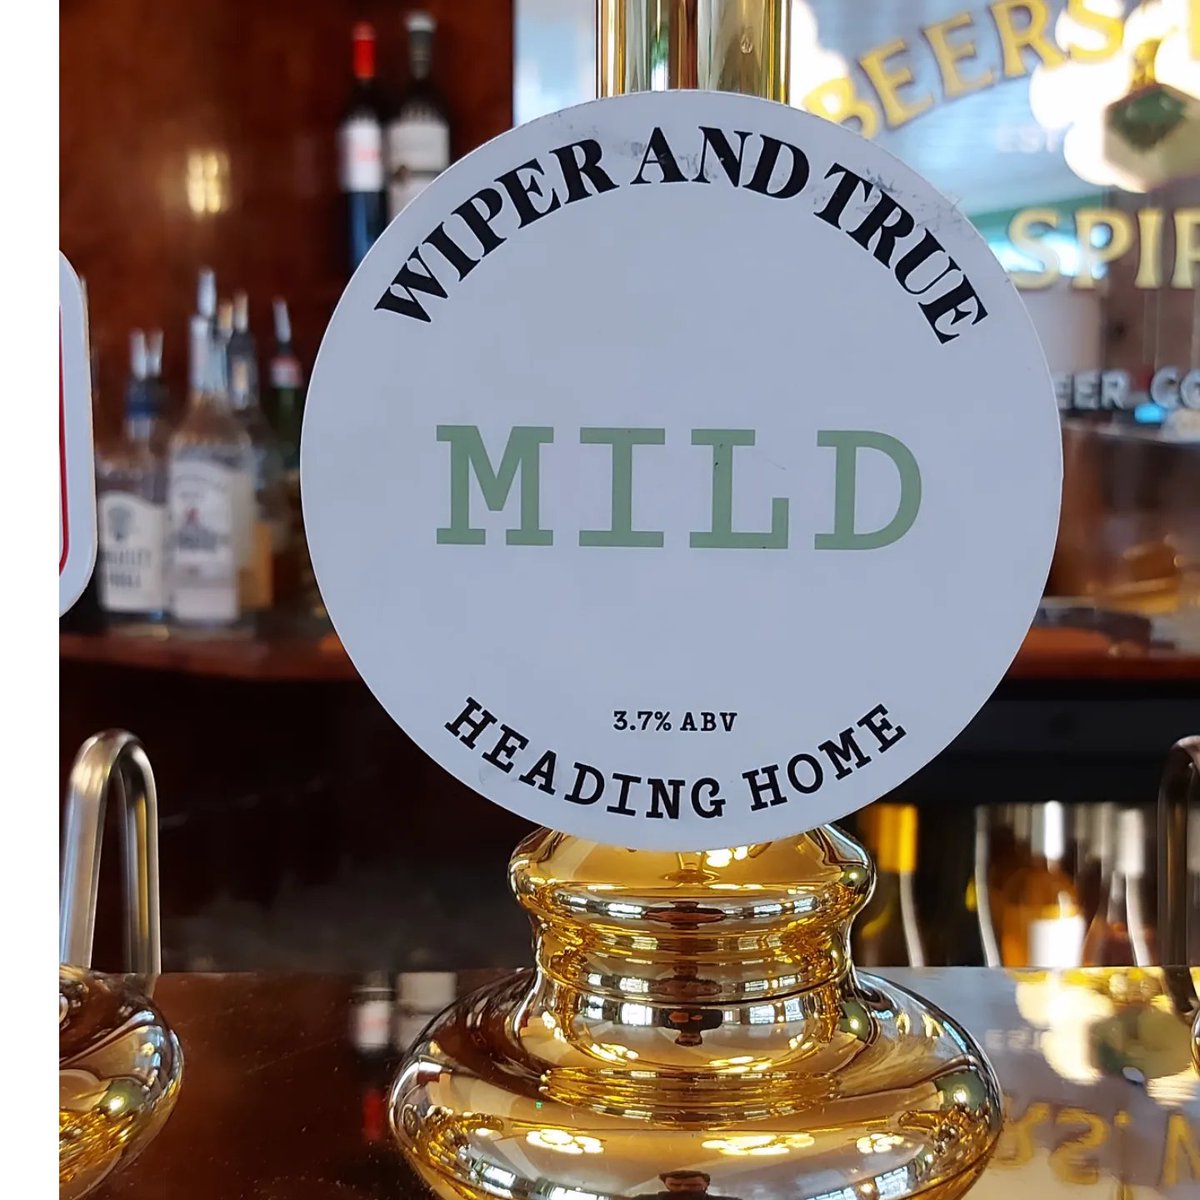 It's May and that can only mean one thing! It's Mild May! We're showing some love to this classic style with both Keg and Cask options Featuring: GLOW - Dark Mild from @dropprojectbrew HEADING HOME - Cask Mild from @wiperandtrue While stocks last! #mildmay #mild #beer